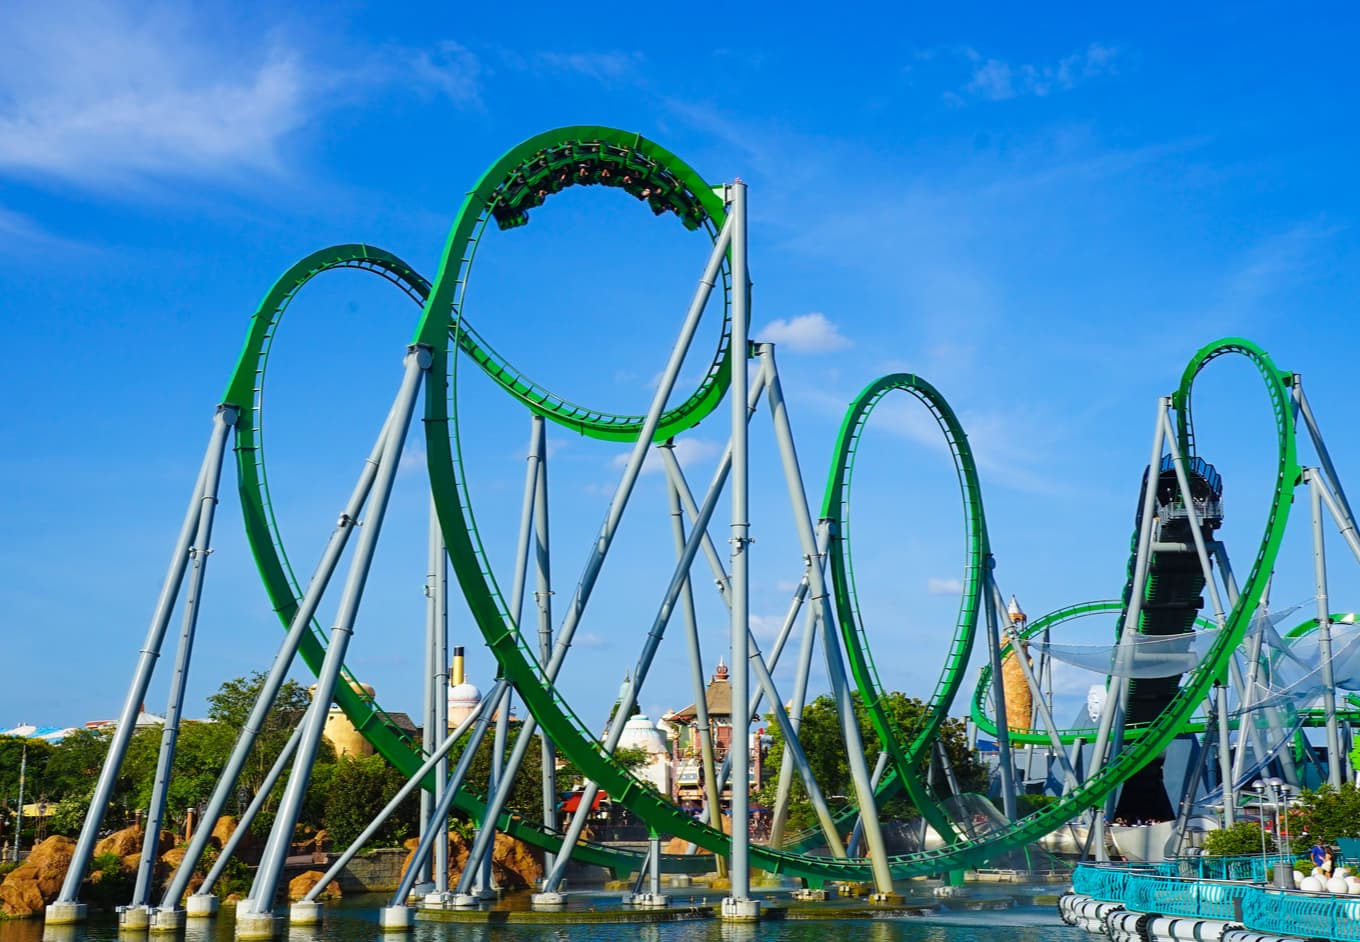 Move Over Florida and California! The Top 10 Amusement Parks in Other States